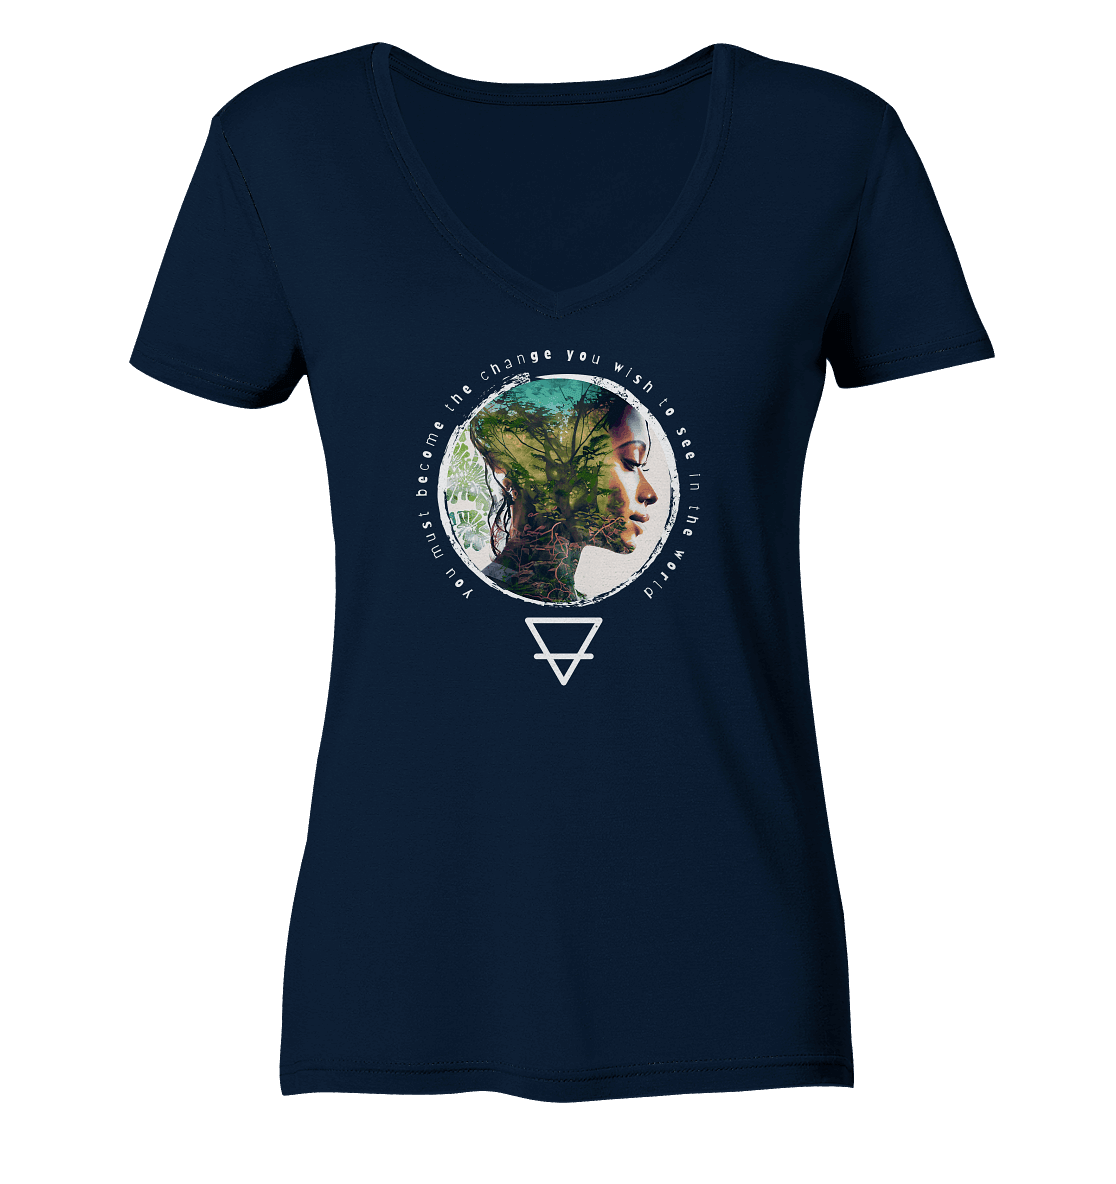 Nature - You must become the change you wish to see in the world - Ladies Organic V-Neck Shirt